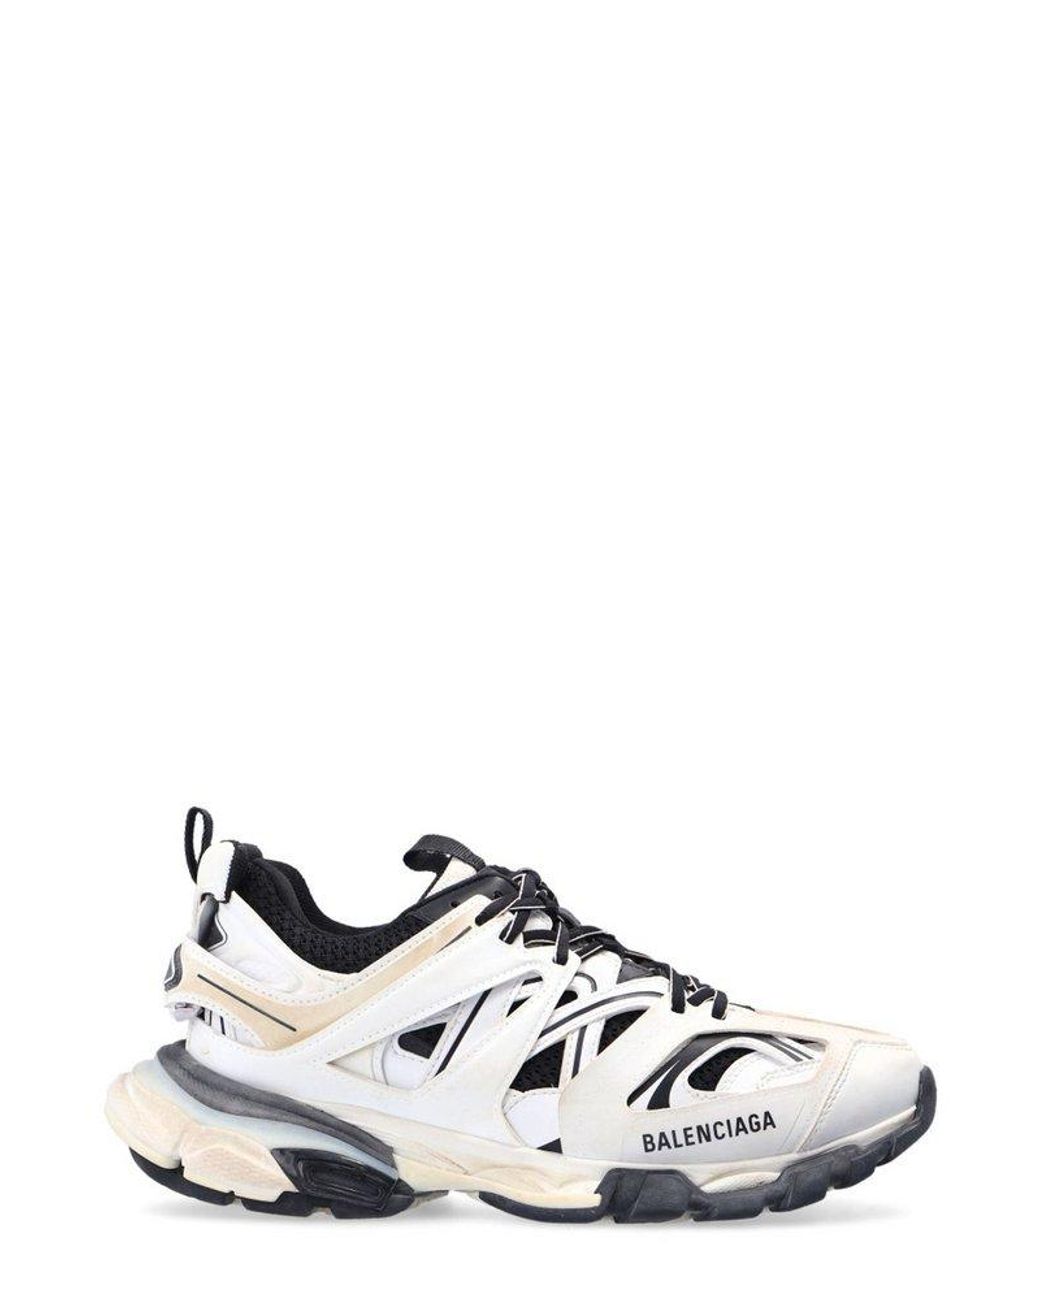 Balenciaga Track Worn Out Sneakers in White | Lyst